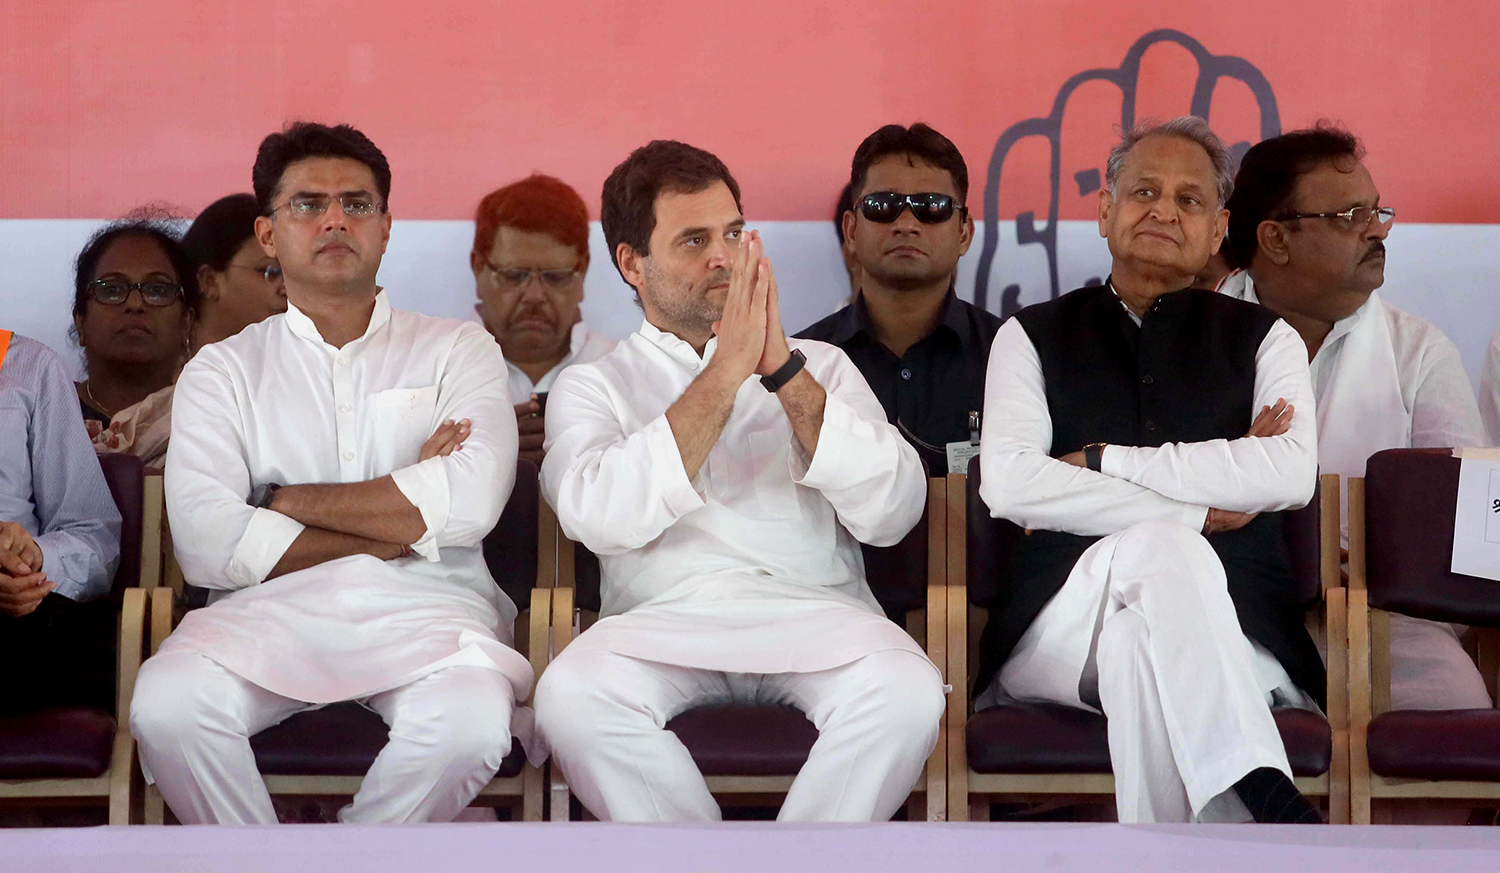 Once again, Congress high command struggles to control Pilot-Gehlot tussle in Rajasthan